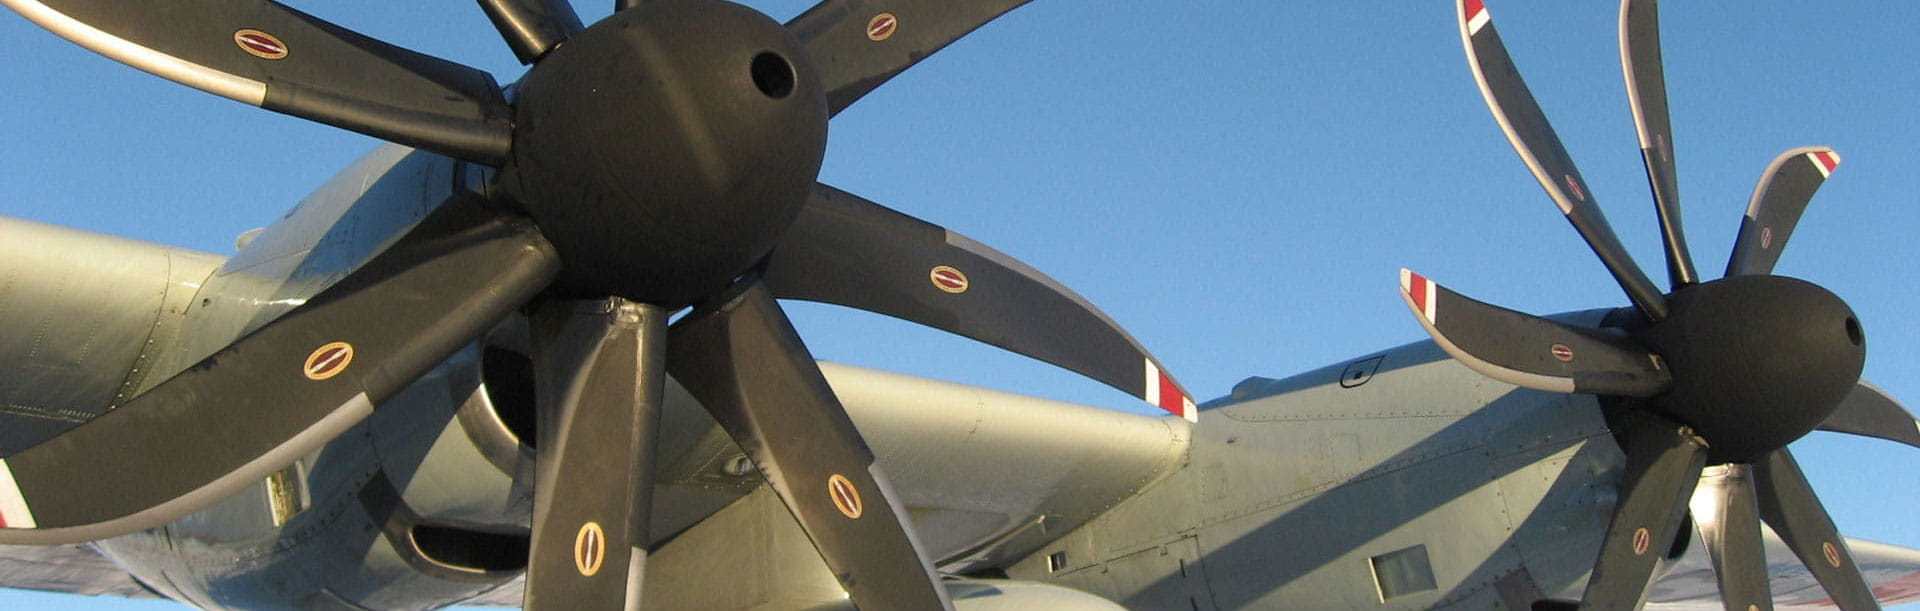 Close-up of aircraft propellers